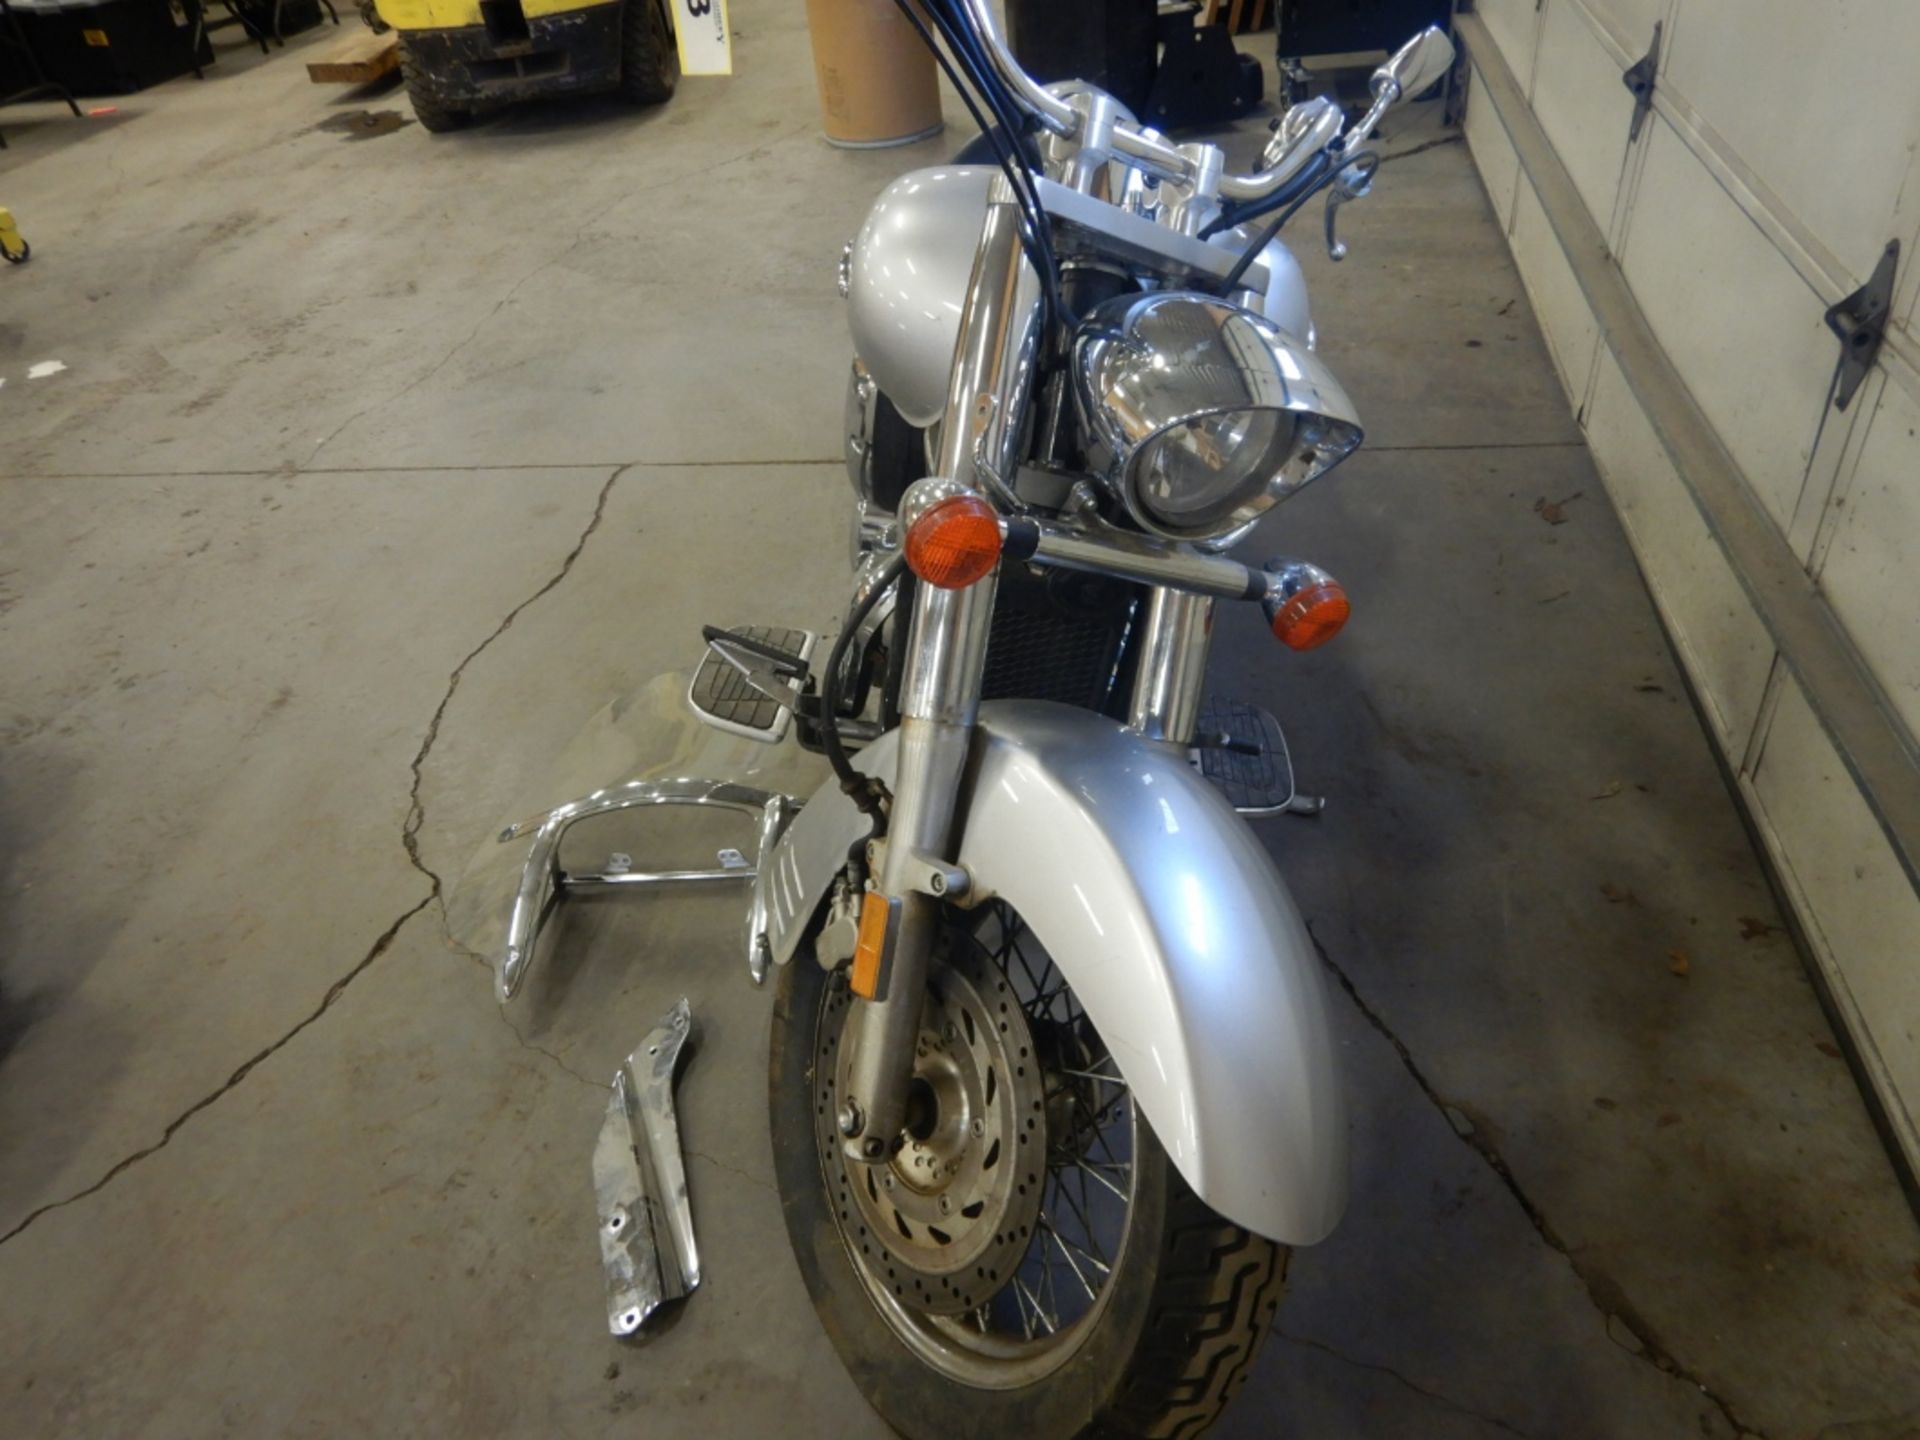 2006 HONDA VTX1300S6 MOTORCYCLE W/ WINDSHIELD INCLUDED (INSTALLATION REQUIRED) 5067 KM SHOWING - Image 5 of 12